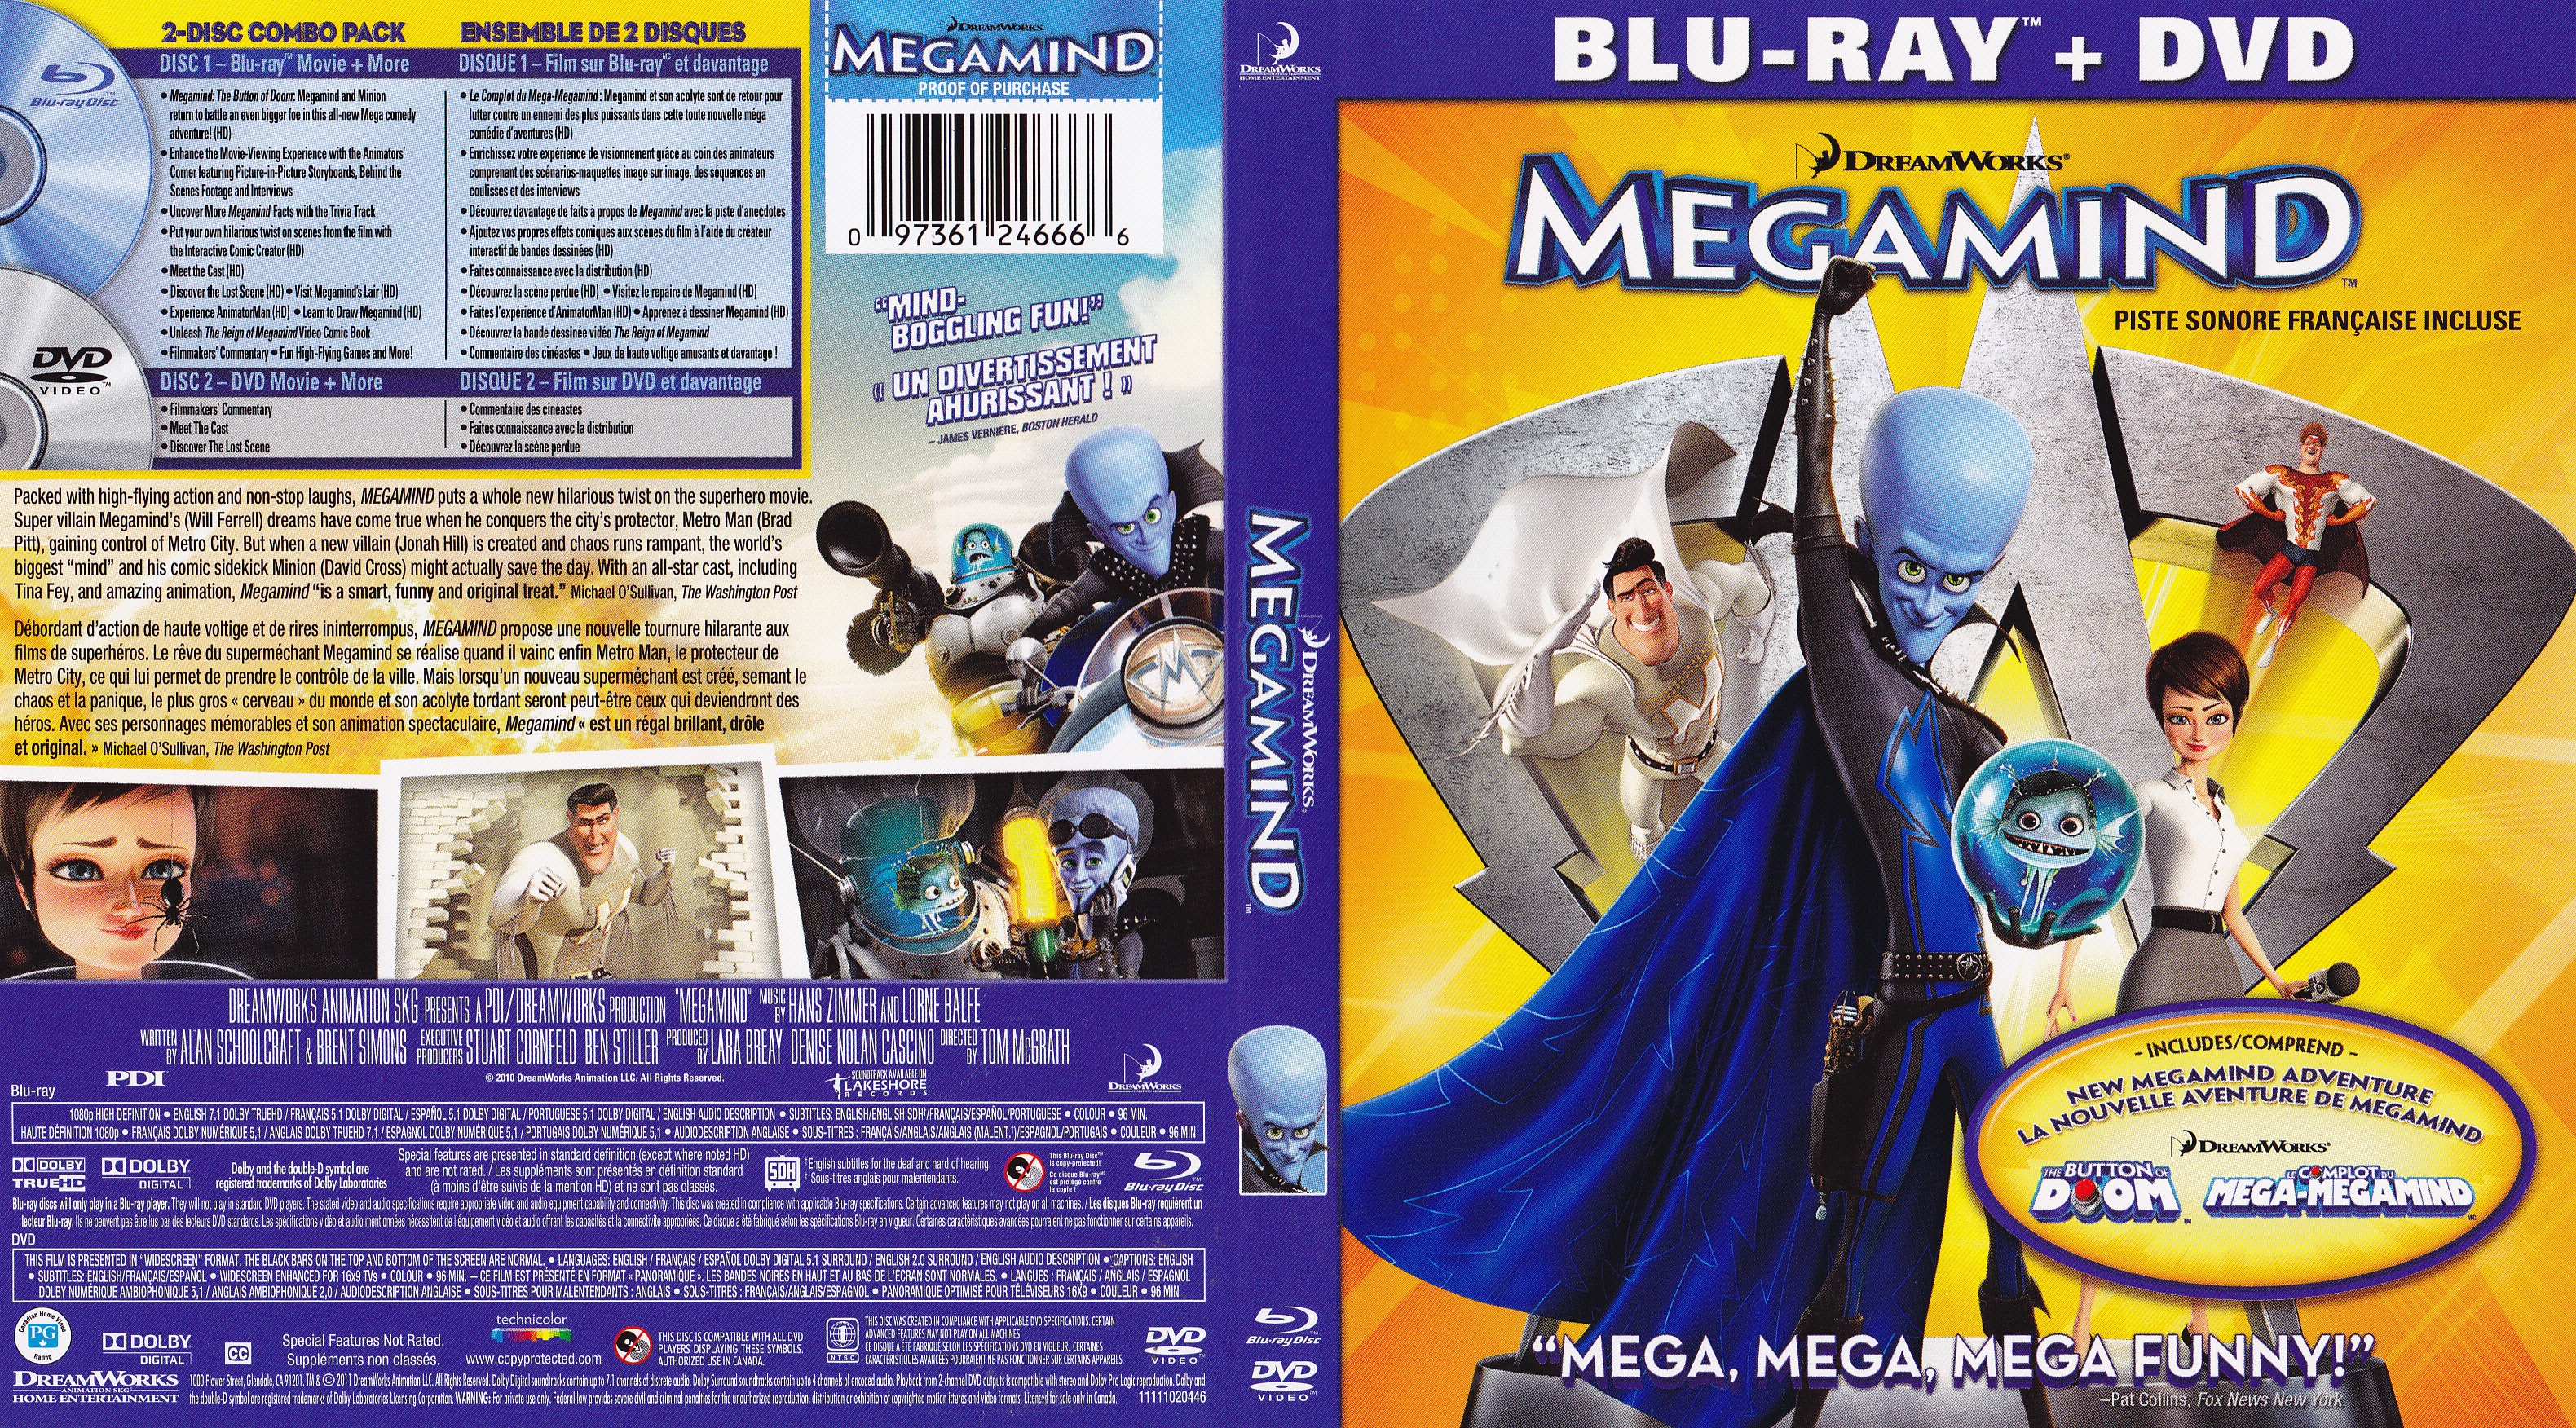 Jaquette DVD Megamind (Canadienne) (BLU-RAY)